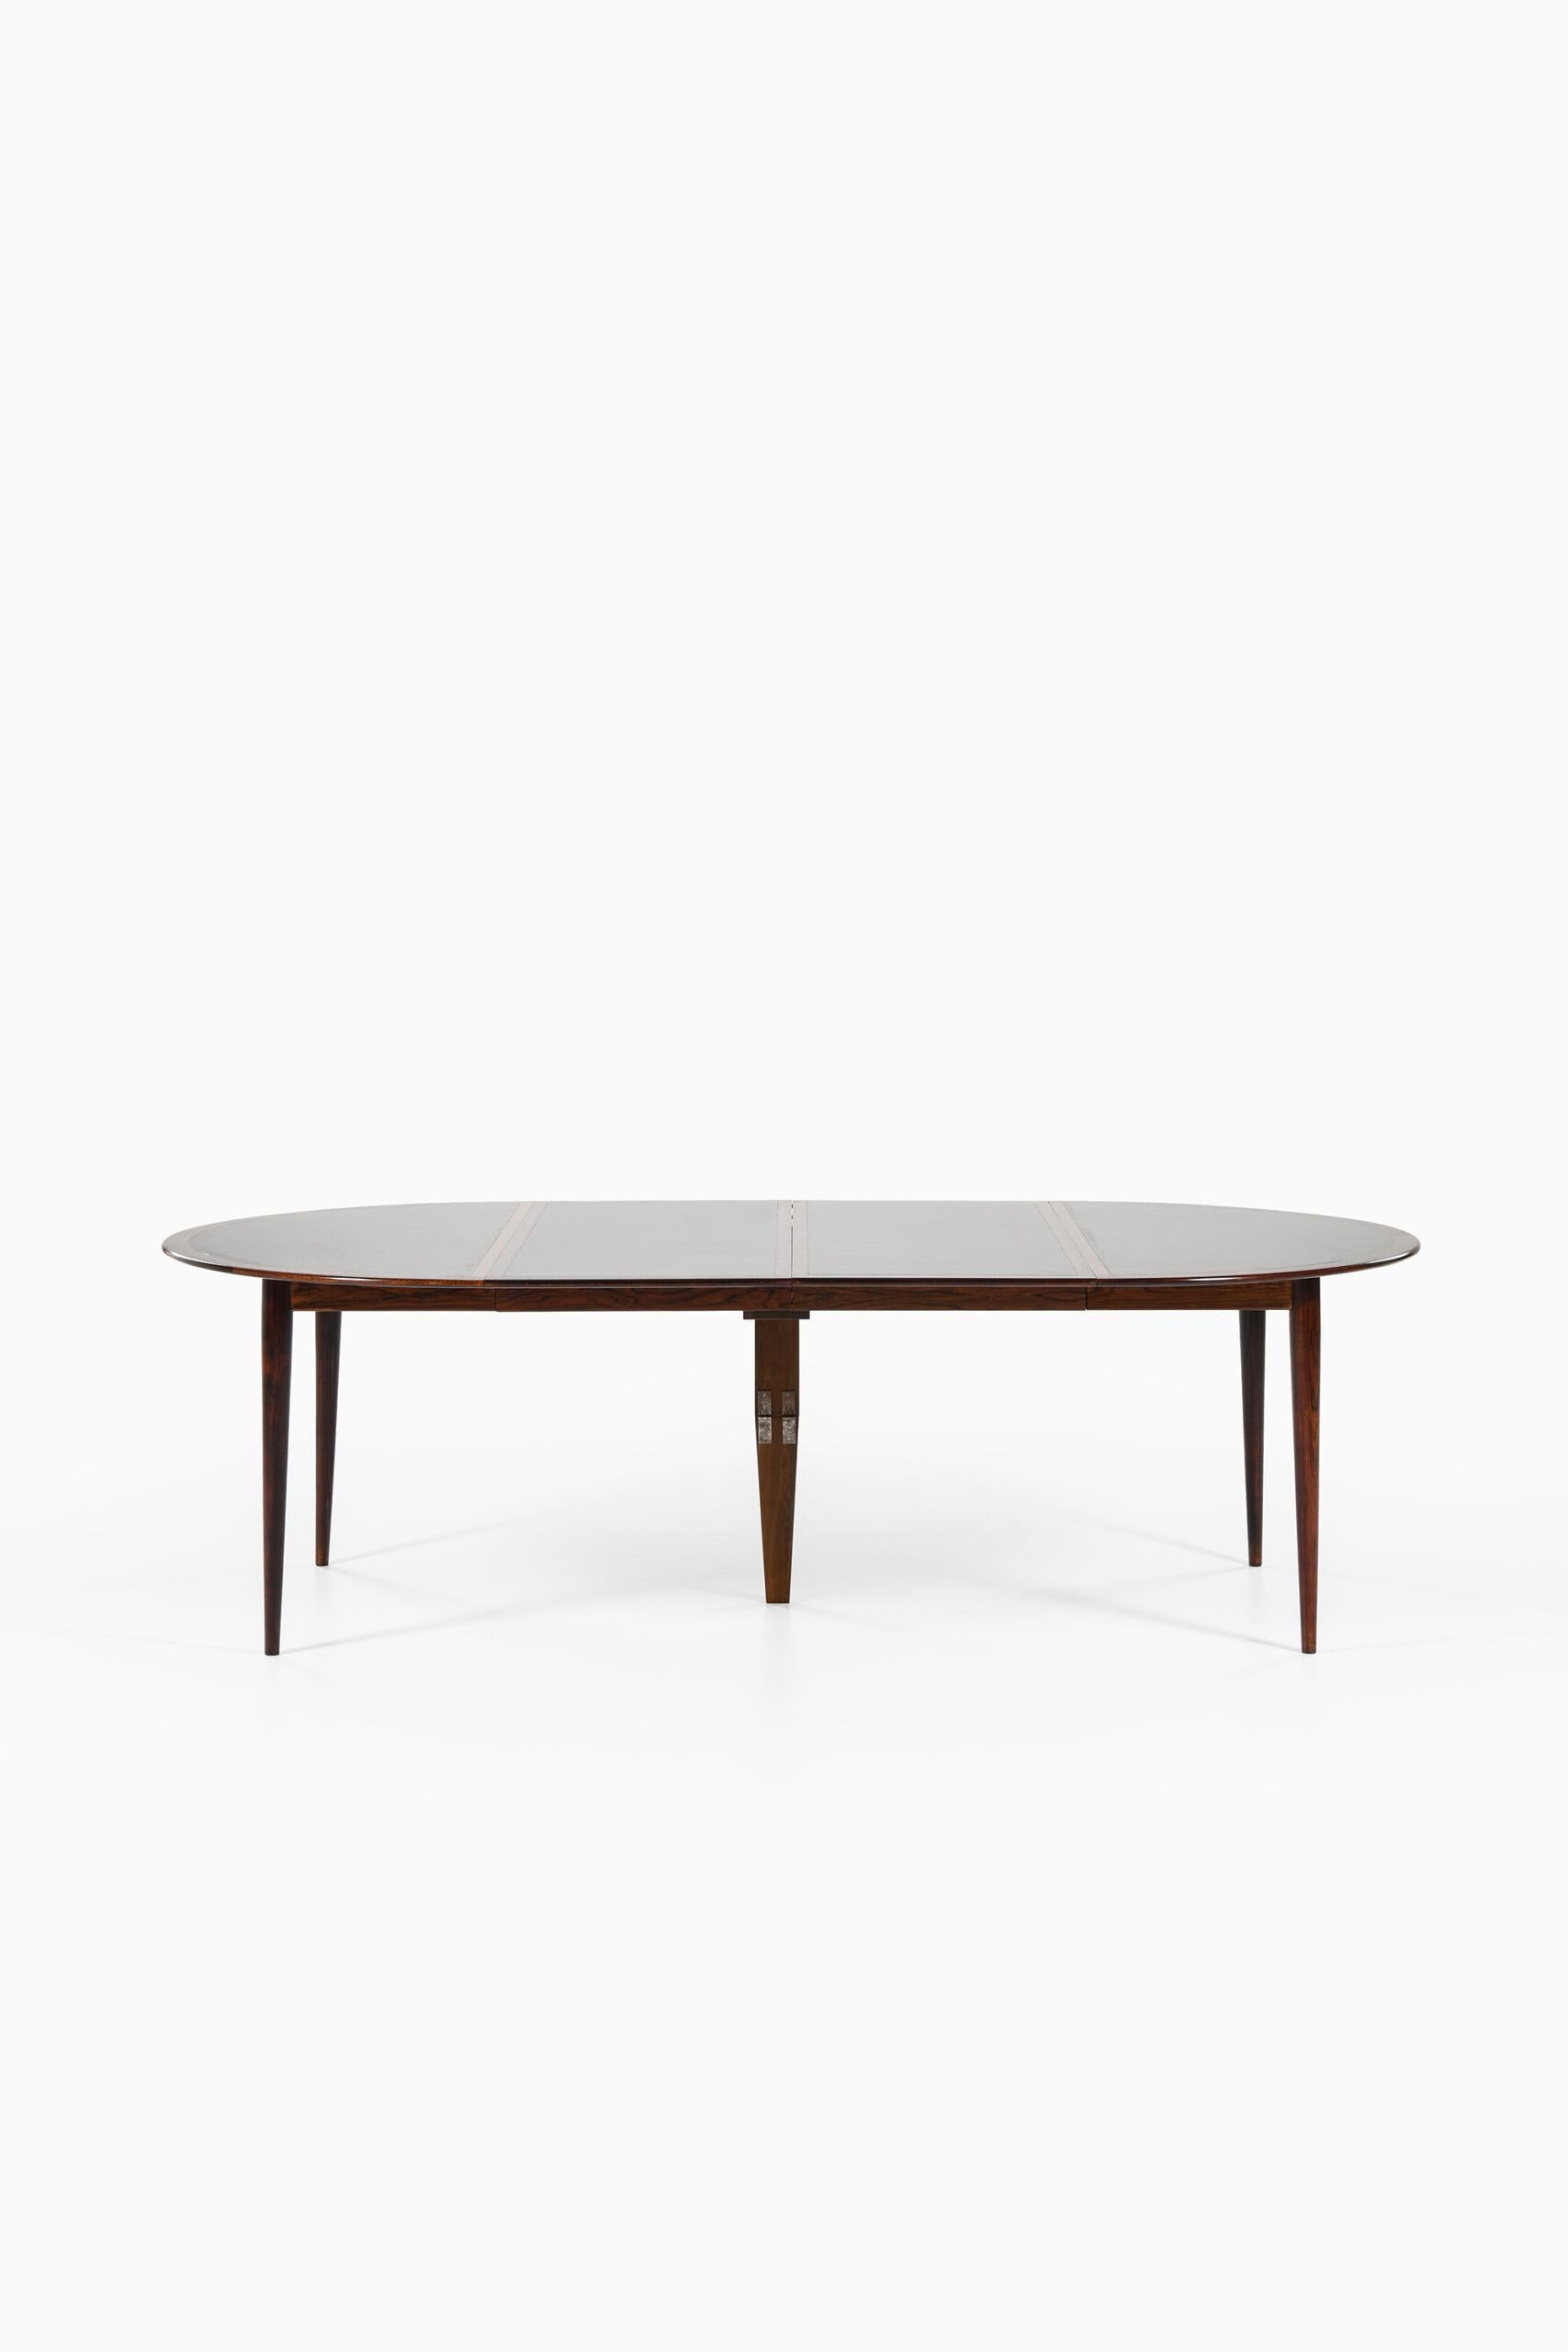 Mid-20th Century Grete Jalk Dining Table Produced by P. Jeppesens Møbelfabrik in Denmark